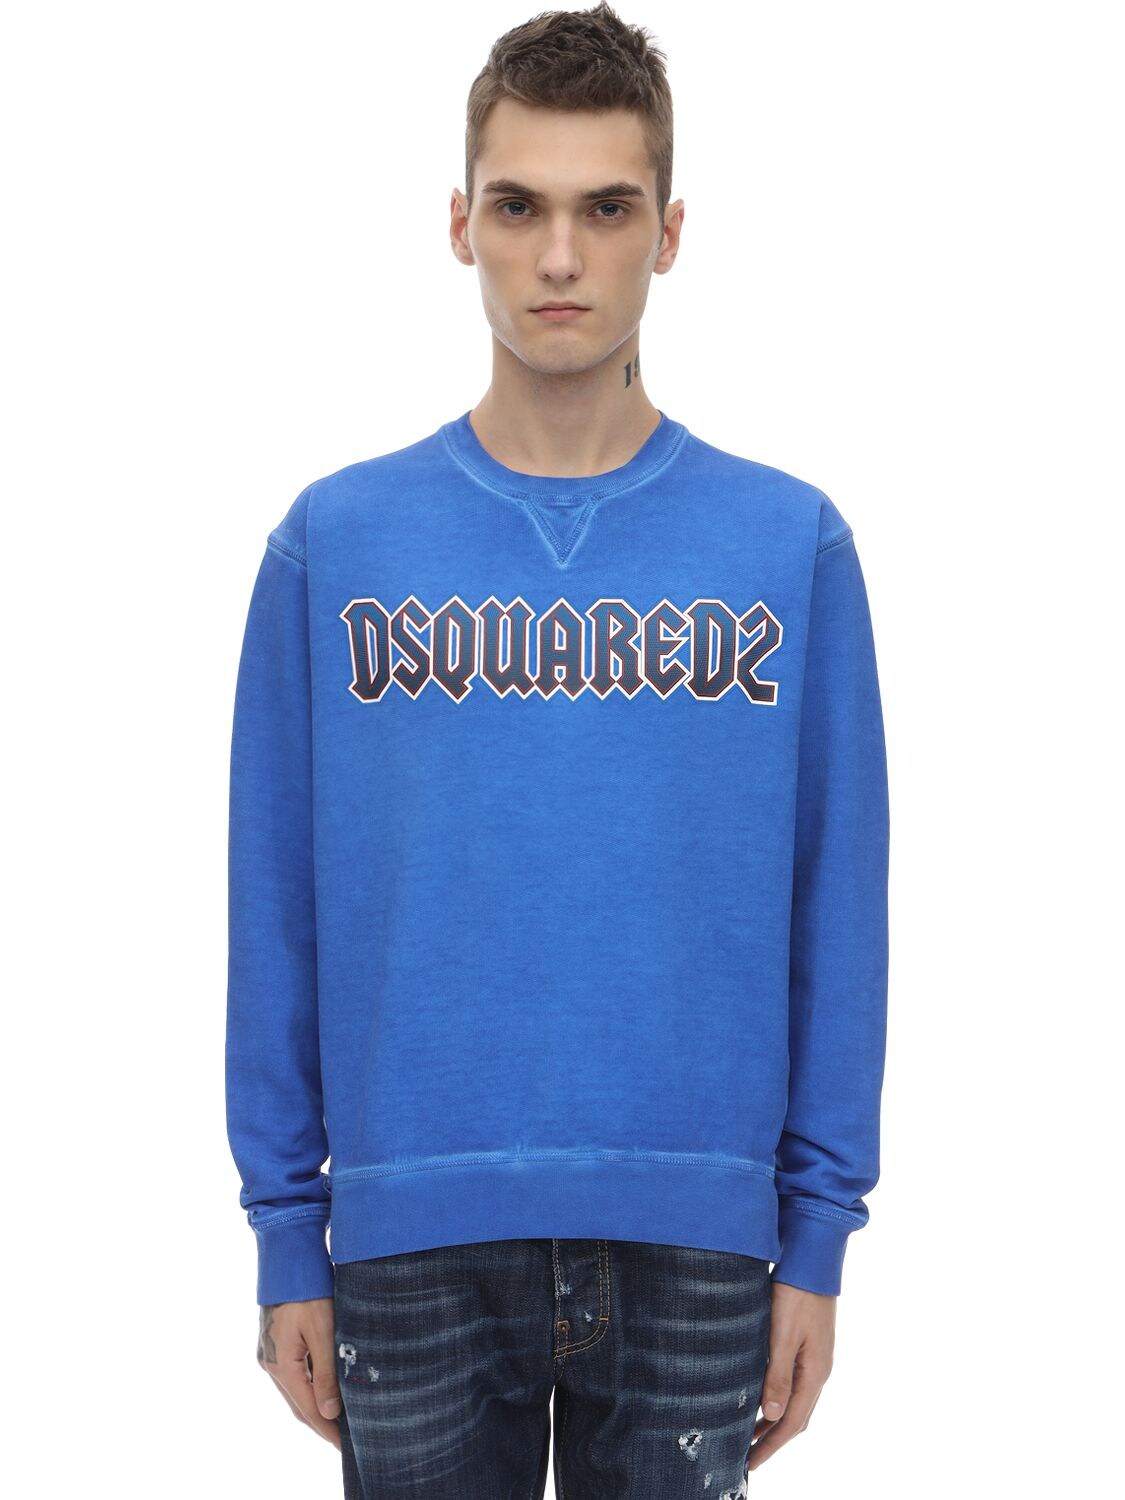 Dsquared2 Printed Cotton Jersey Sweatshirt In Bright Blue